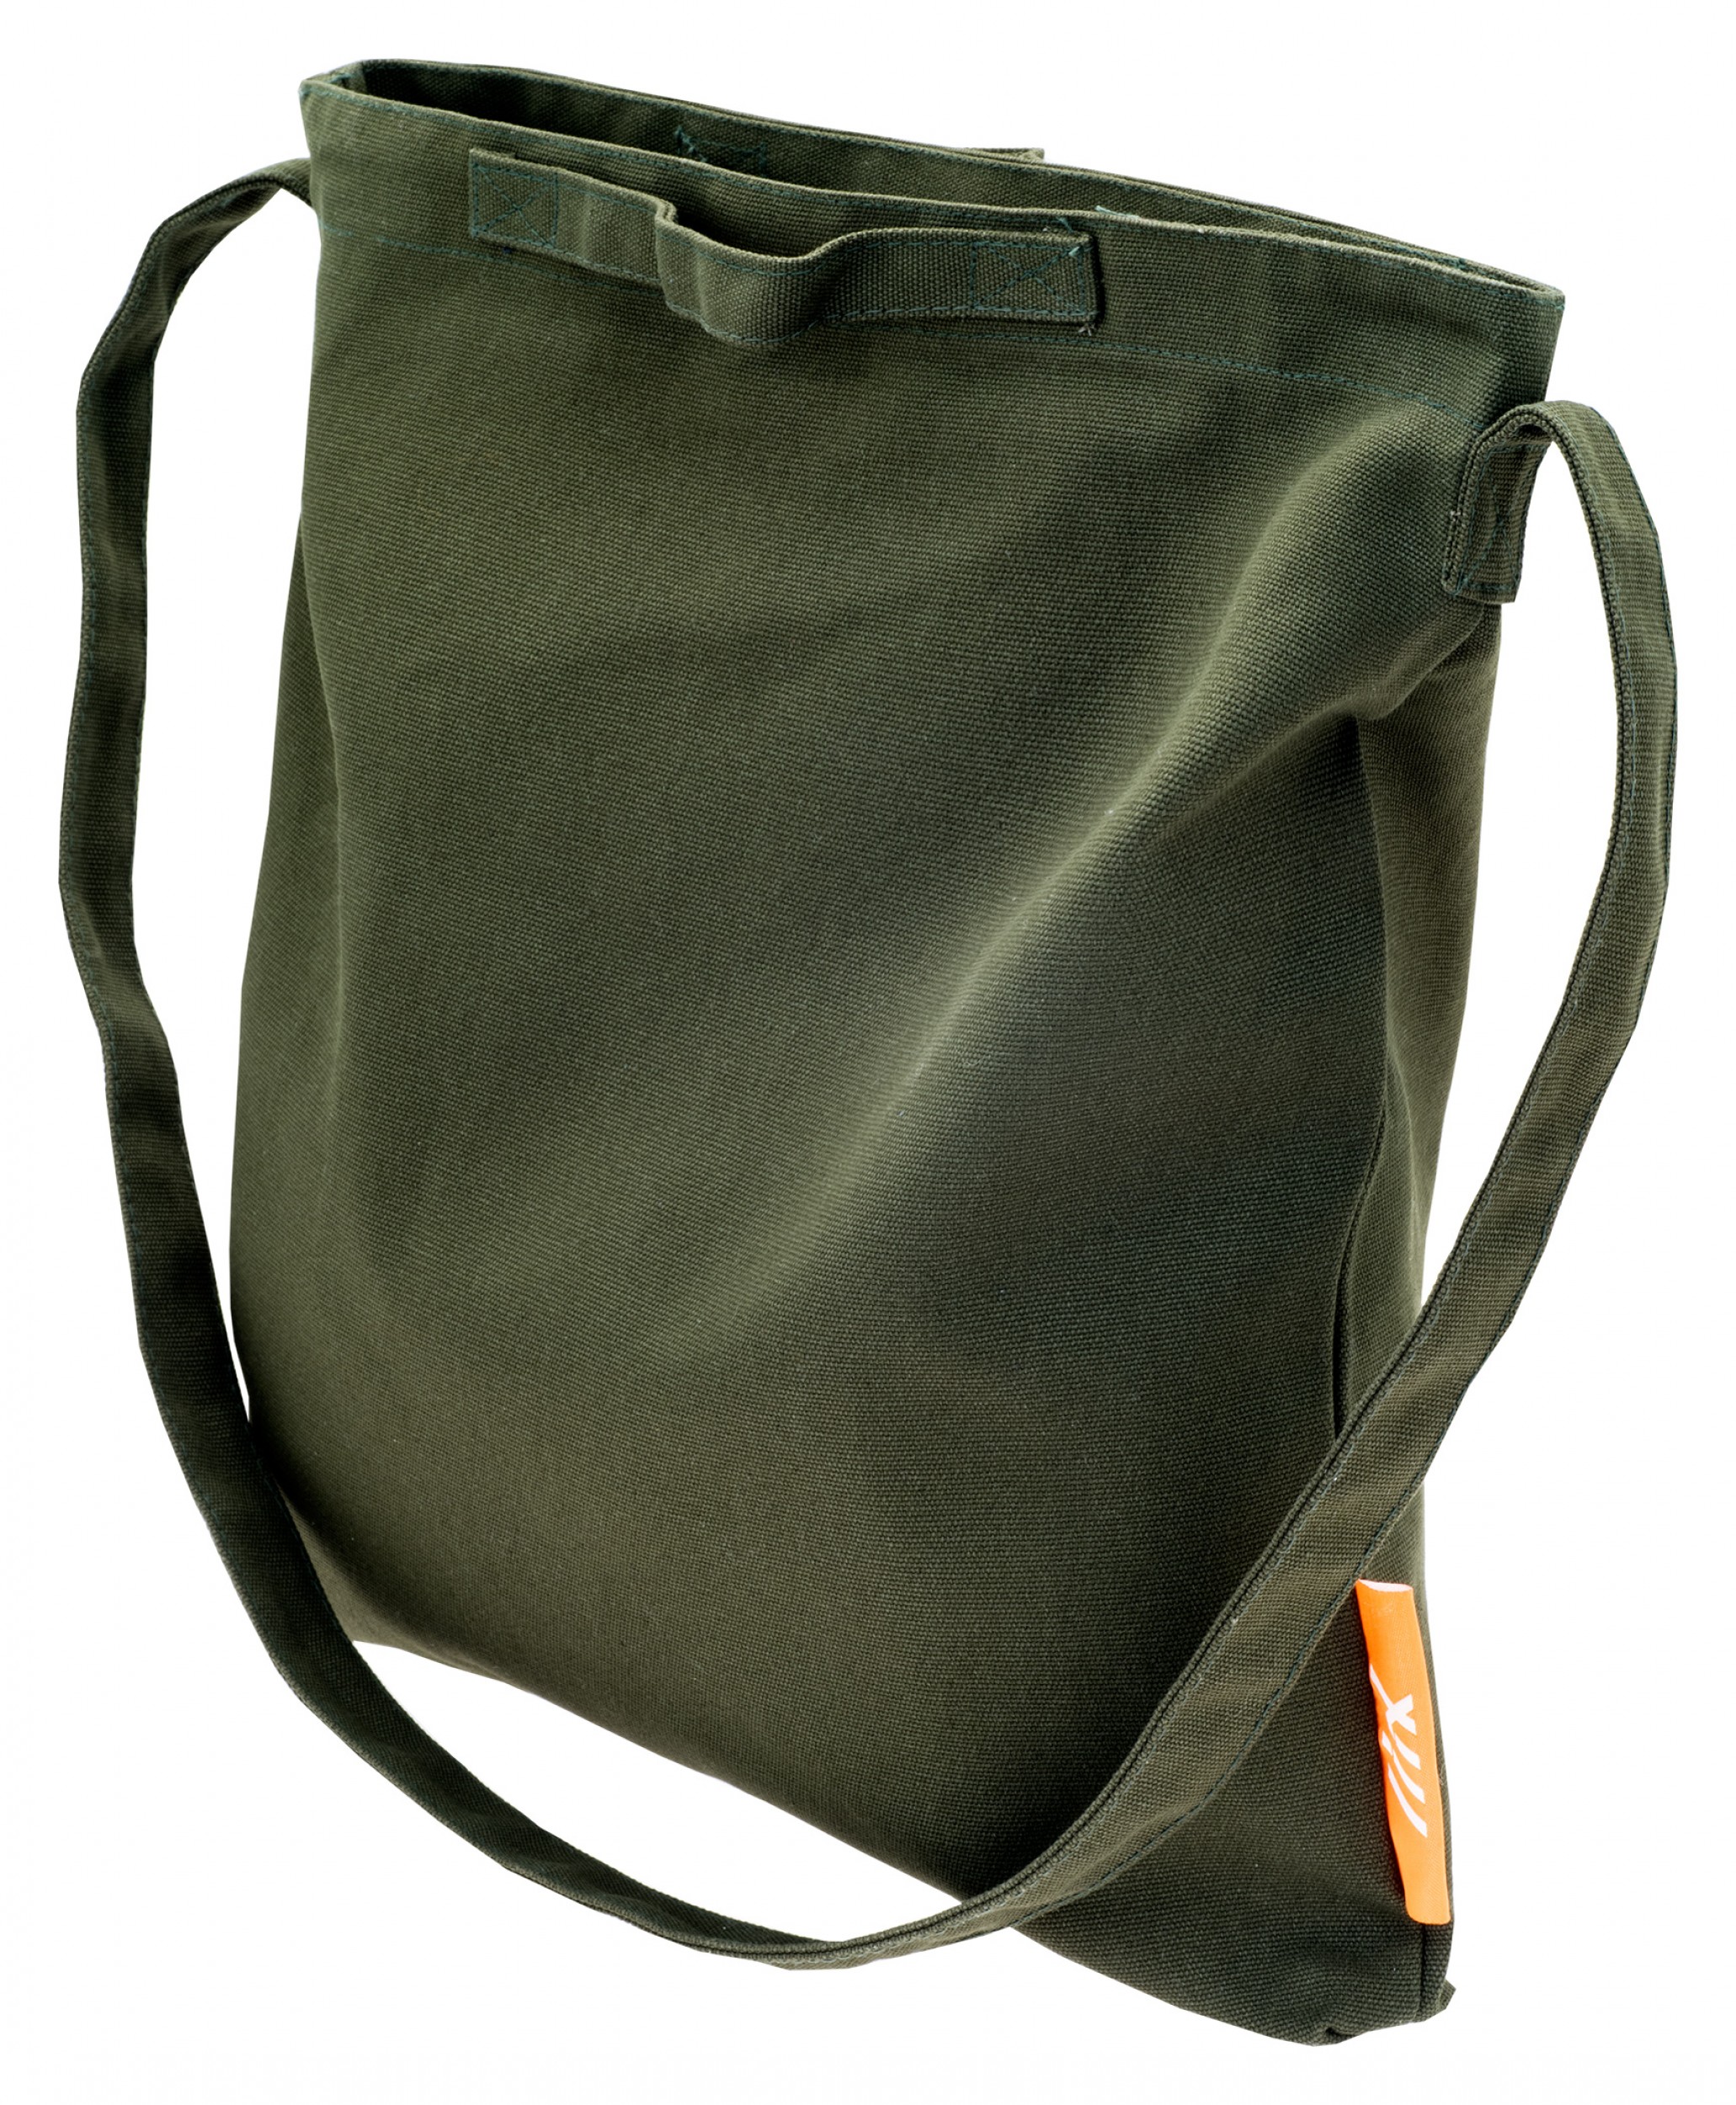 Liix Carry Cotton Black Forest Green